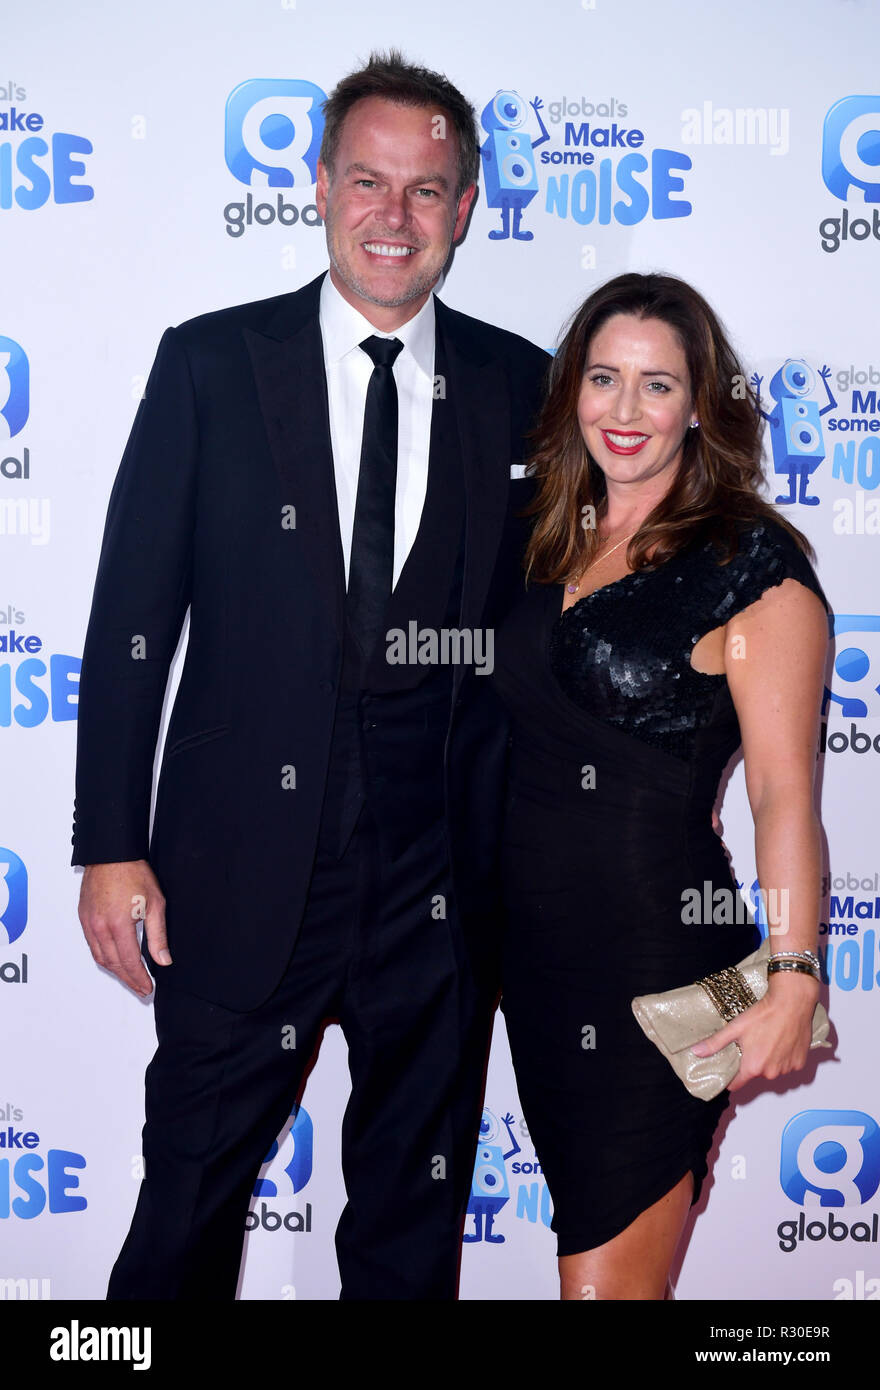 Peter Jones and Tara Capp at Global's Make Some Noise Night in Finsbury Square, London. The gala raised money for the national charity Global's Make Some Noise, set up by Global to help disadvantaged children, young people and their families across the UK. Stock Photo